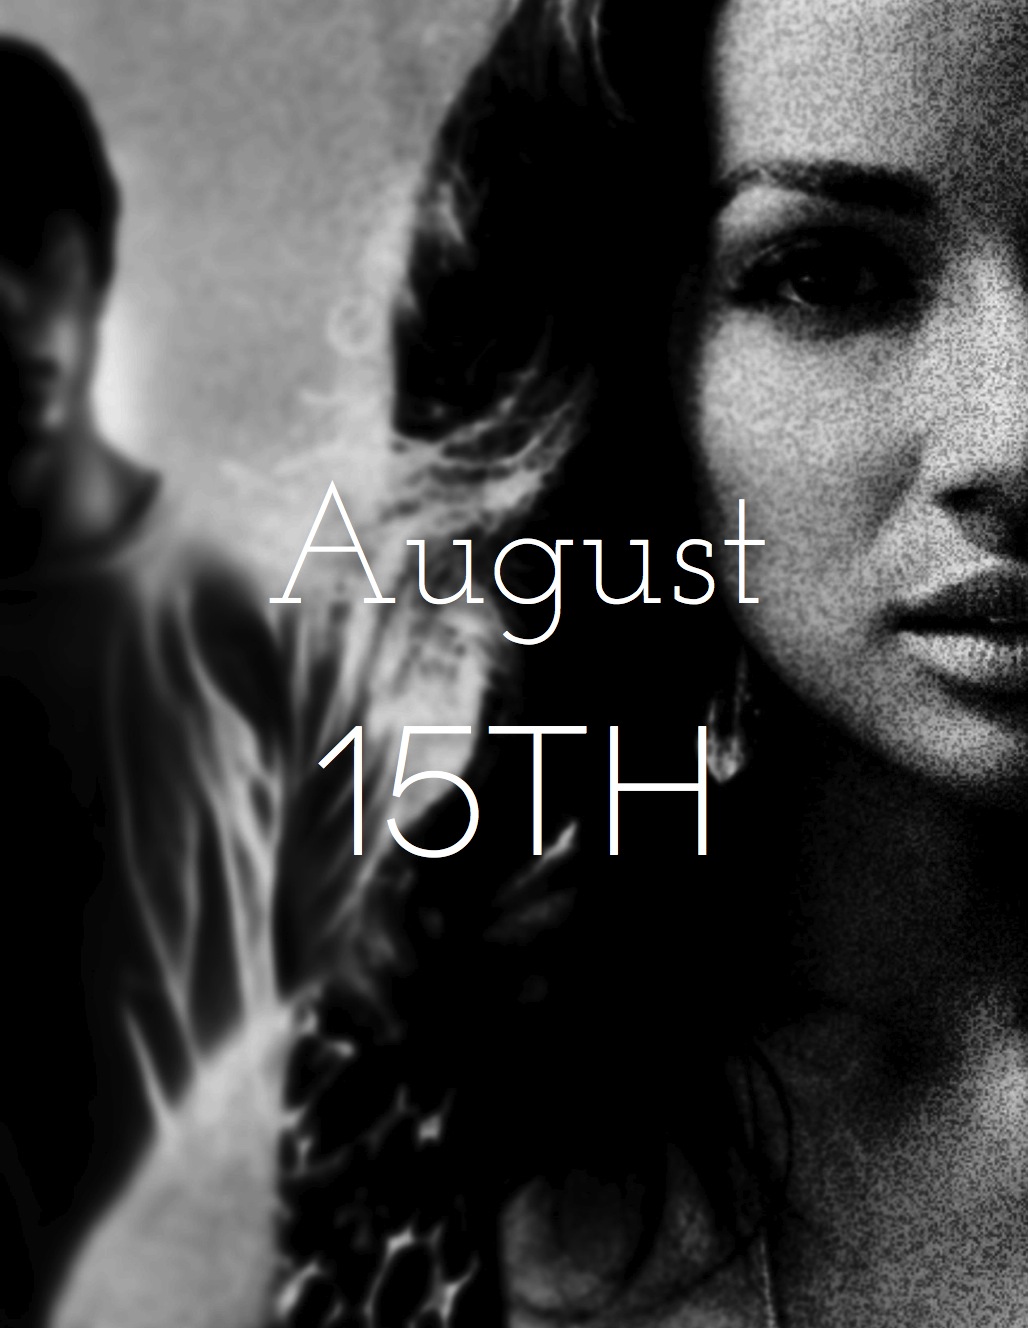 You may not think much of August 15th, but I do.  Can't wait.  Long time coming.  Skin Like Dawn. 